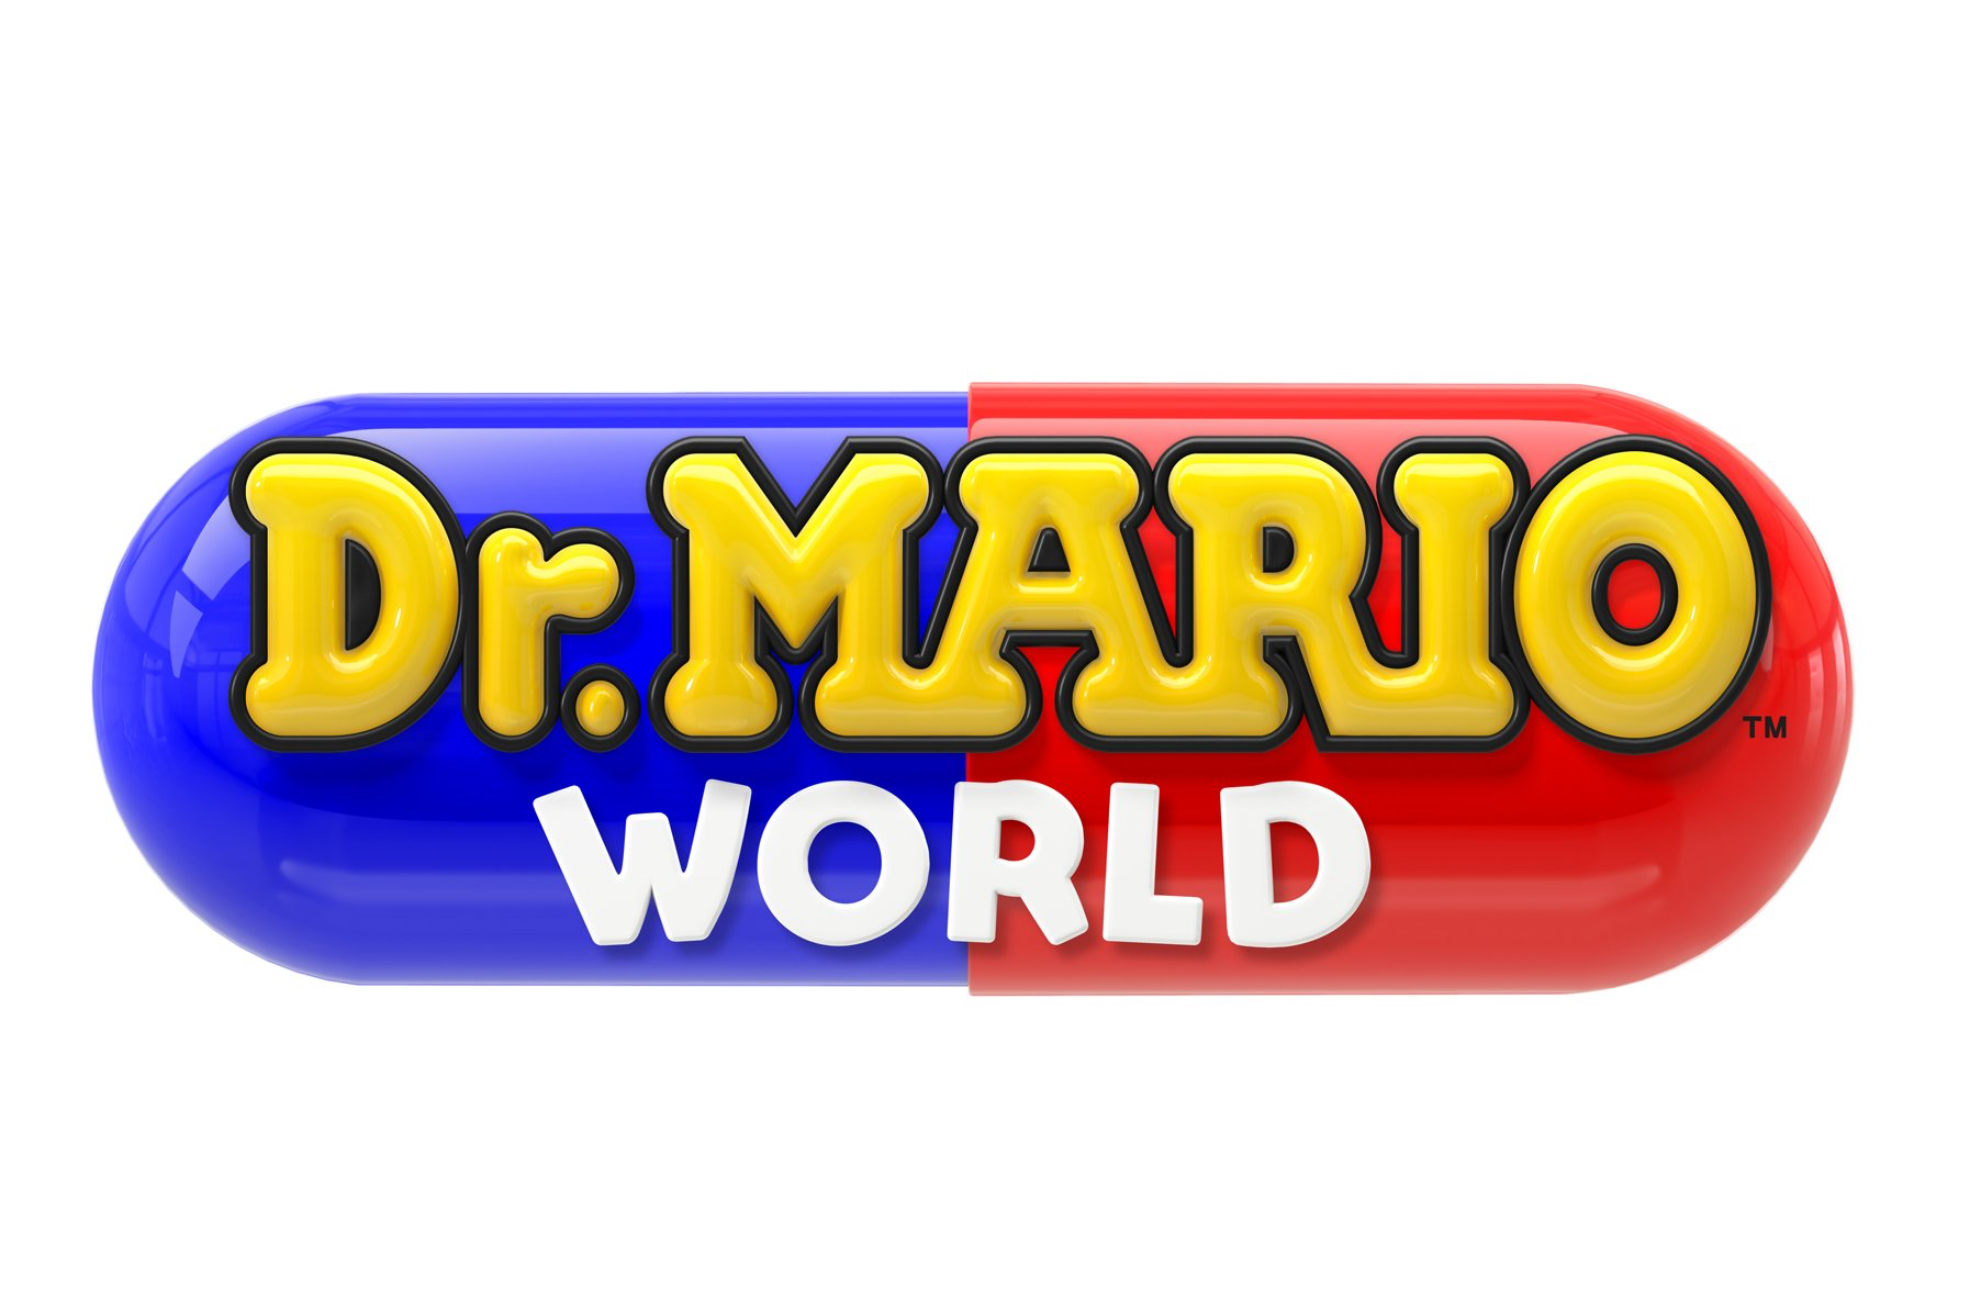 Nintendo Reveals Why They Are Collaborating with LINE on ‘Dr. Mario World’